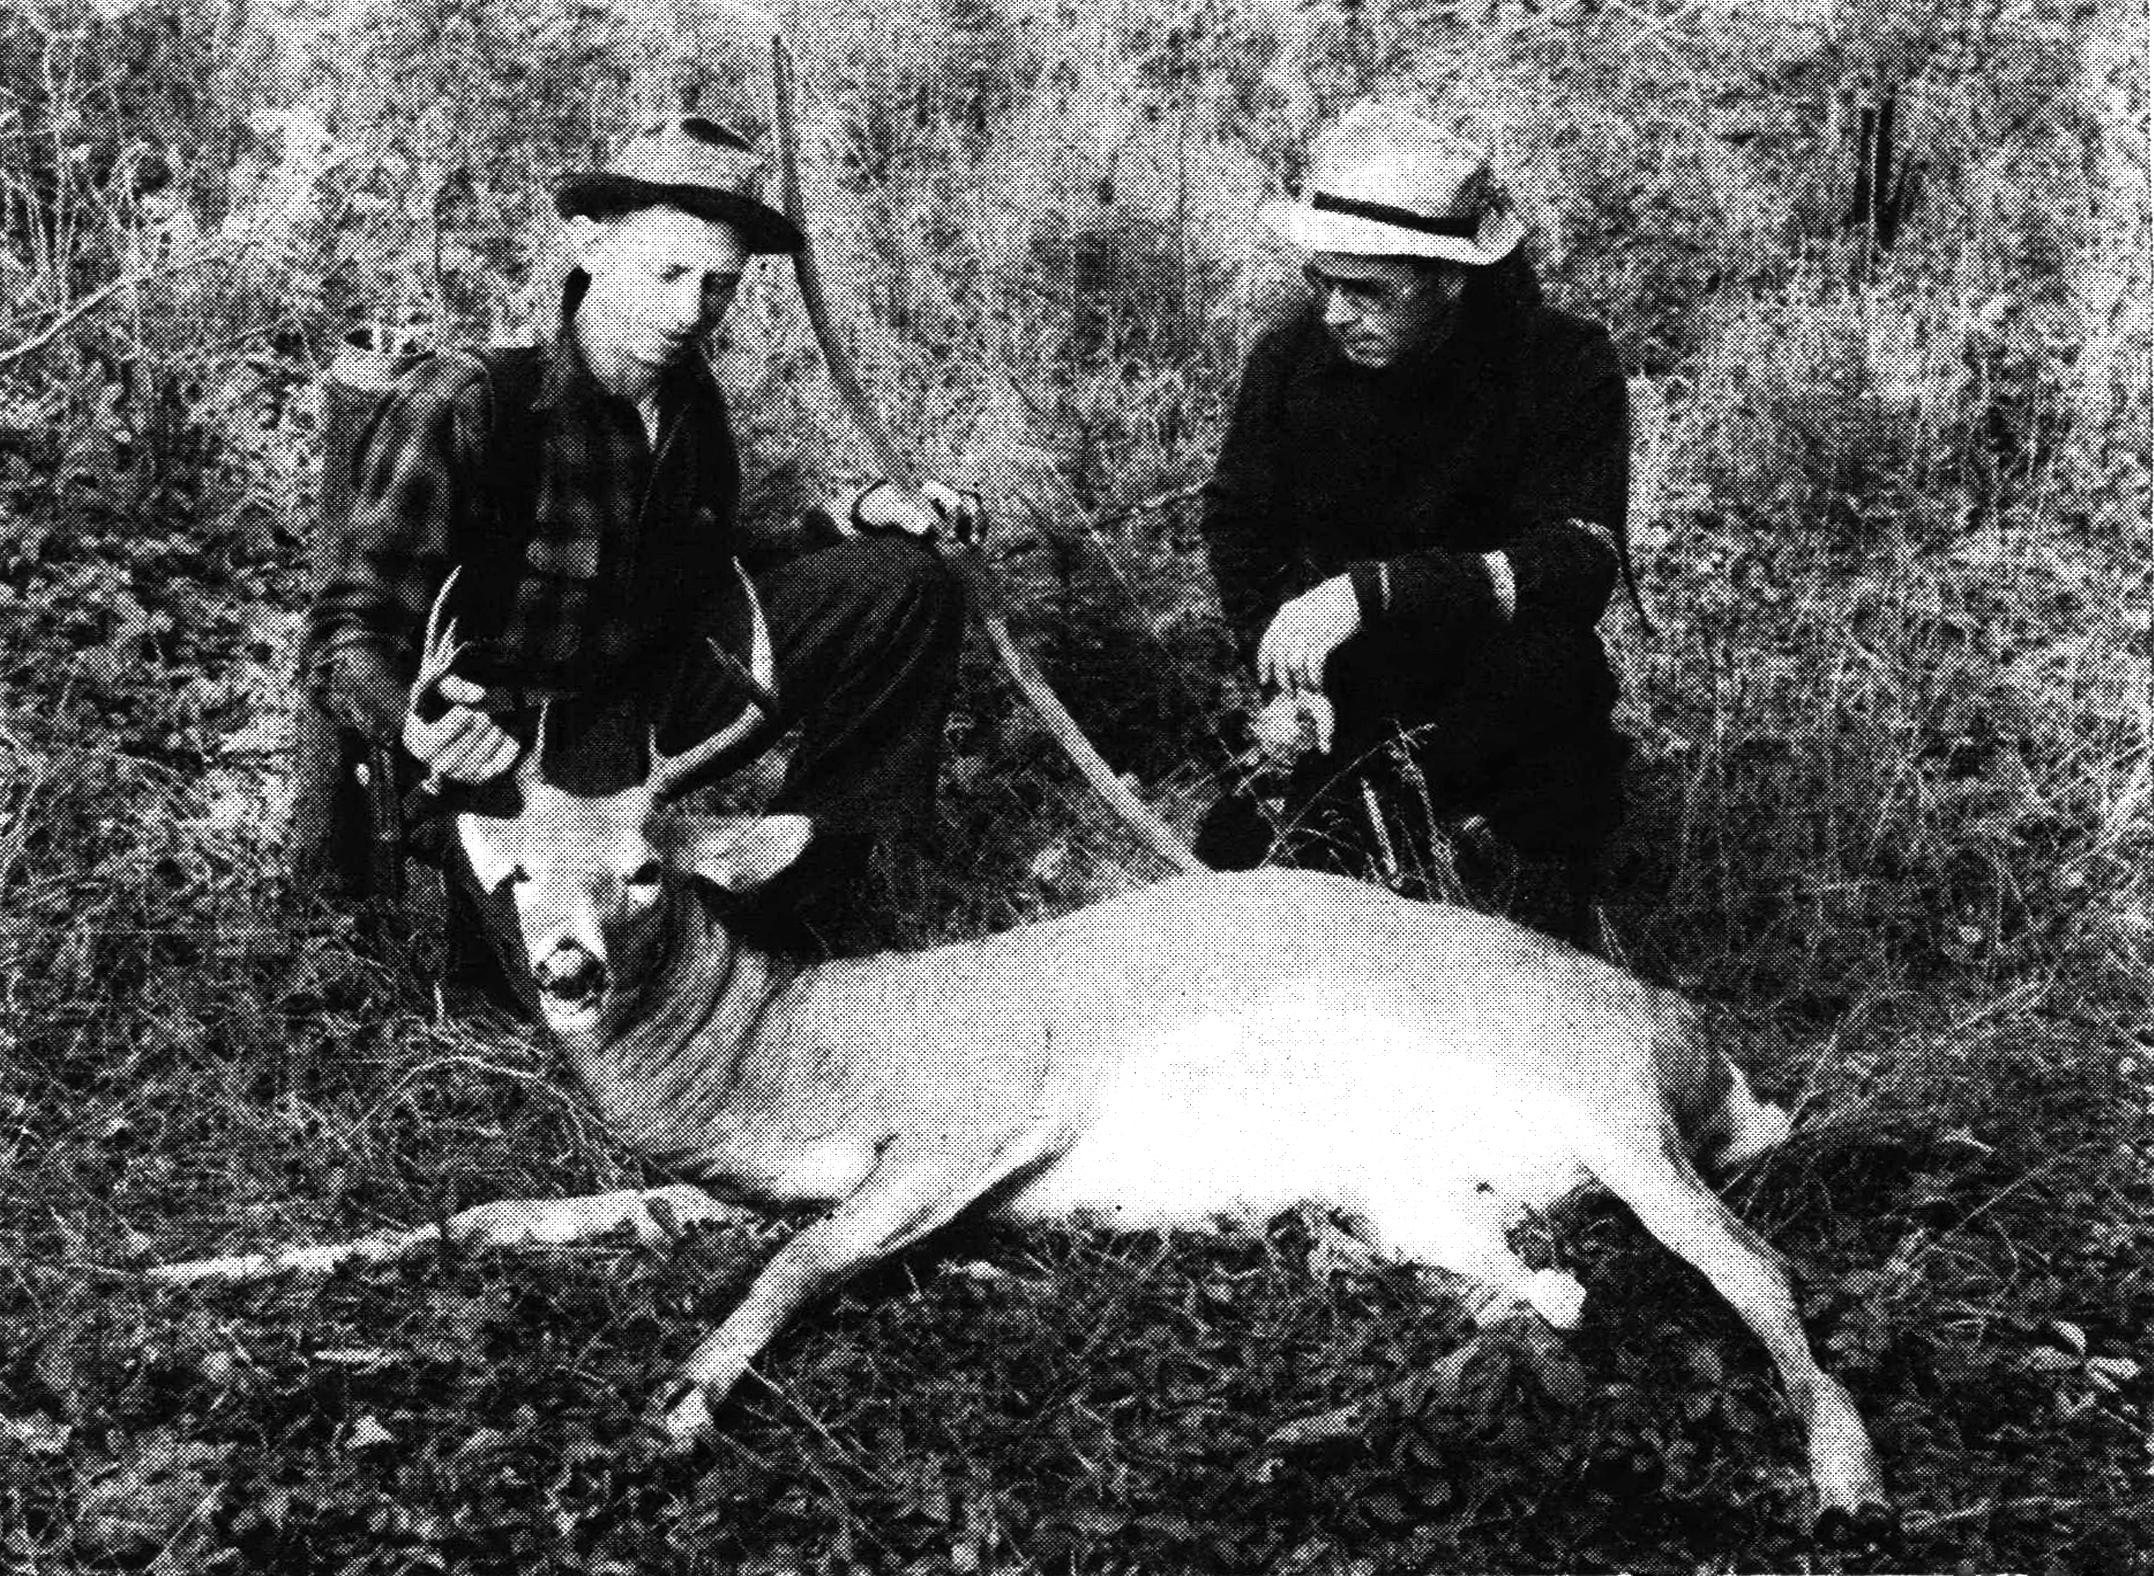 two hunters, one holding a longbow, crouch behind a whitetail deer; vintage B&W photo